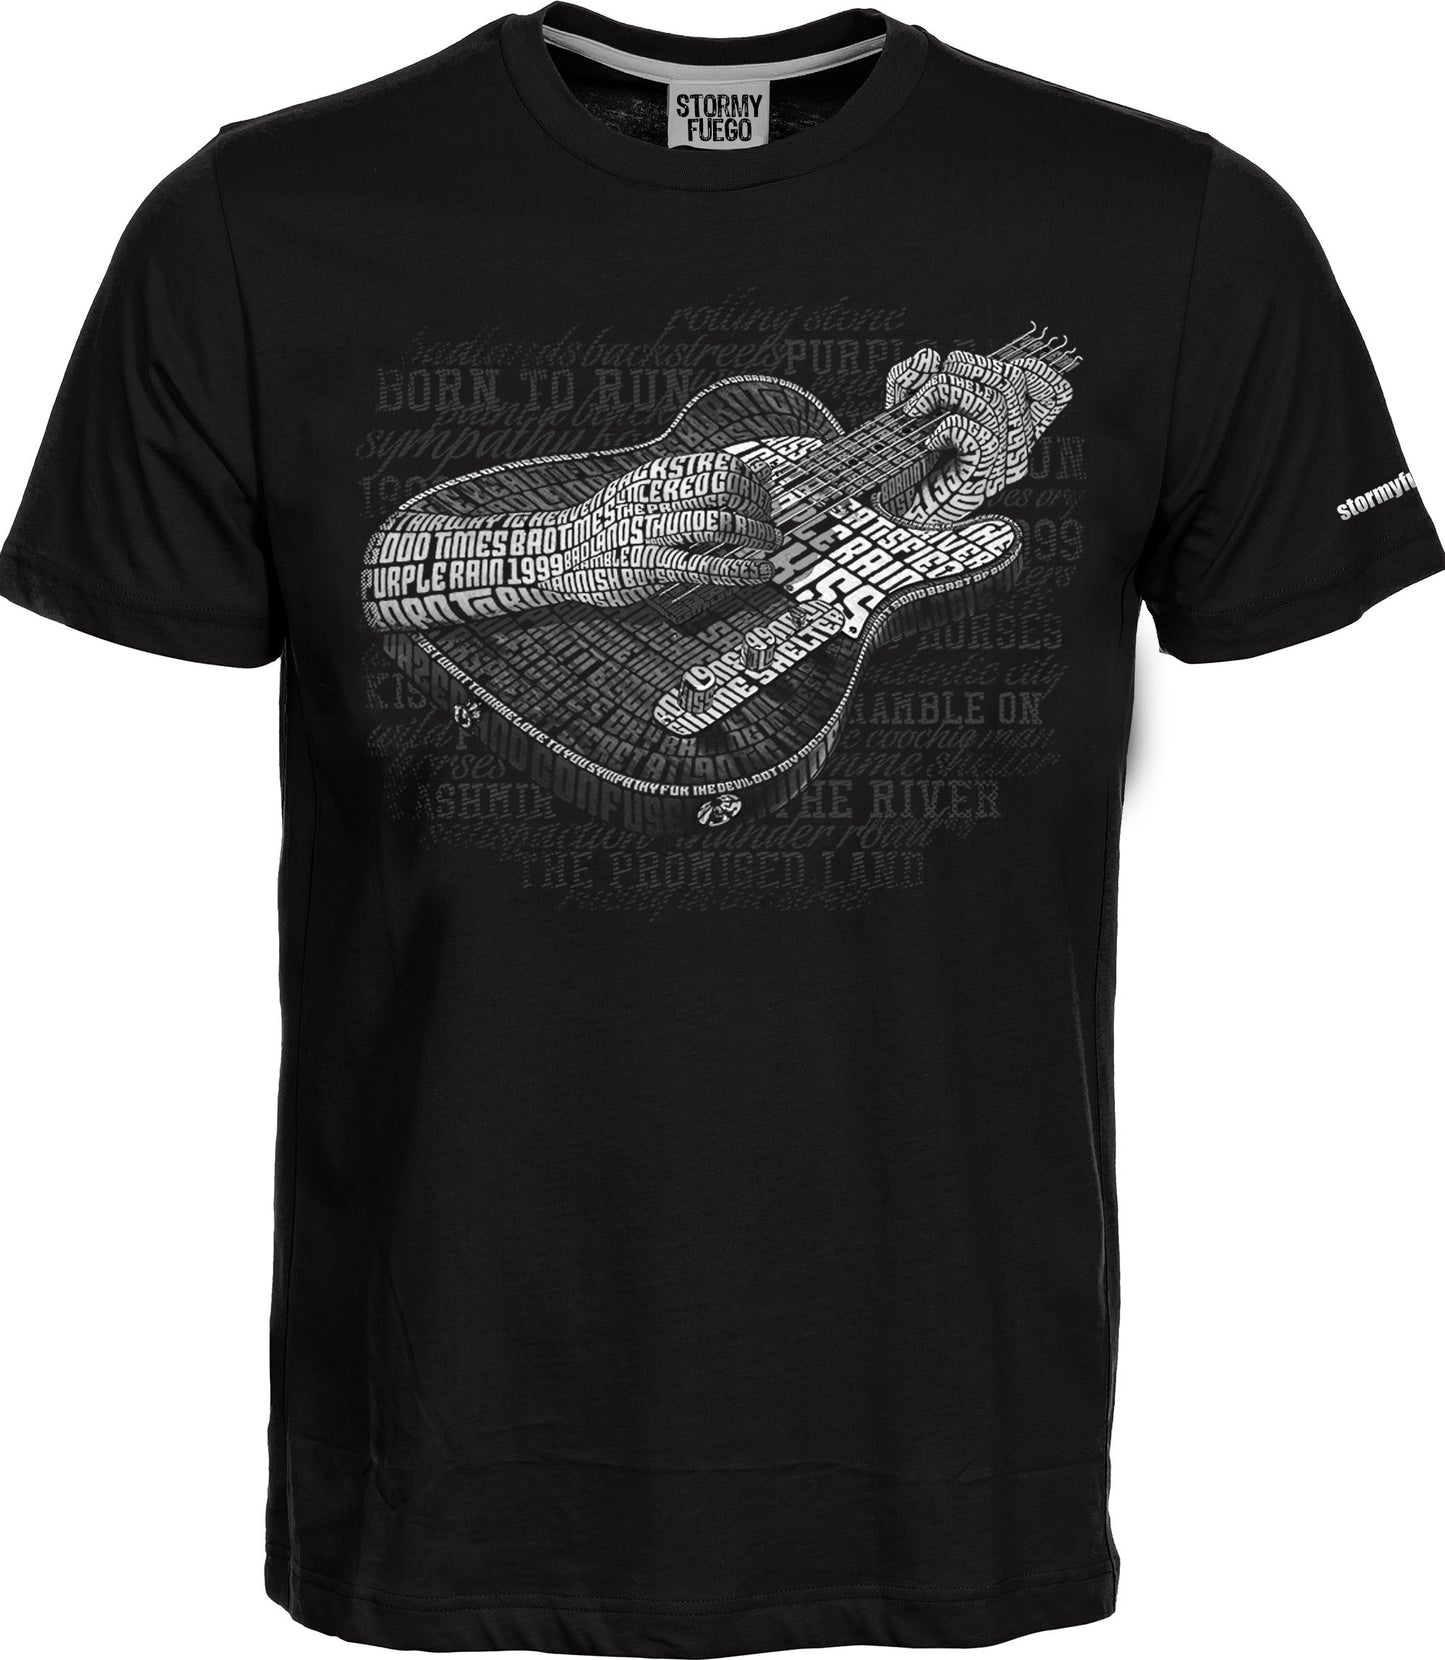 Classic Telecaster Electric Guitar on Short-Sleeve Unisex T-Shirt